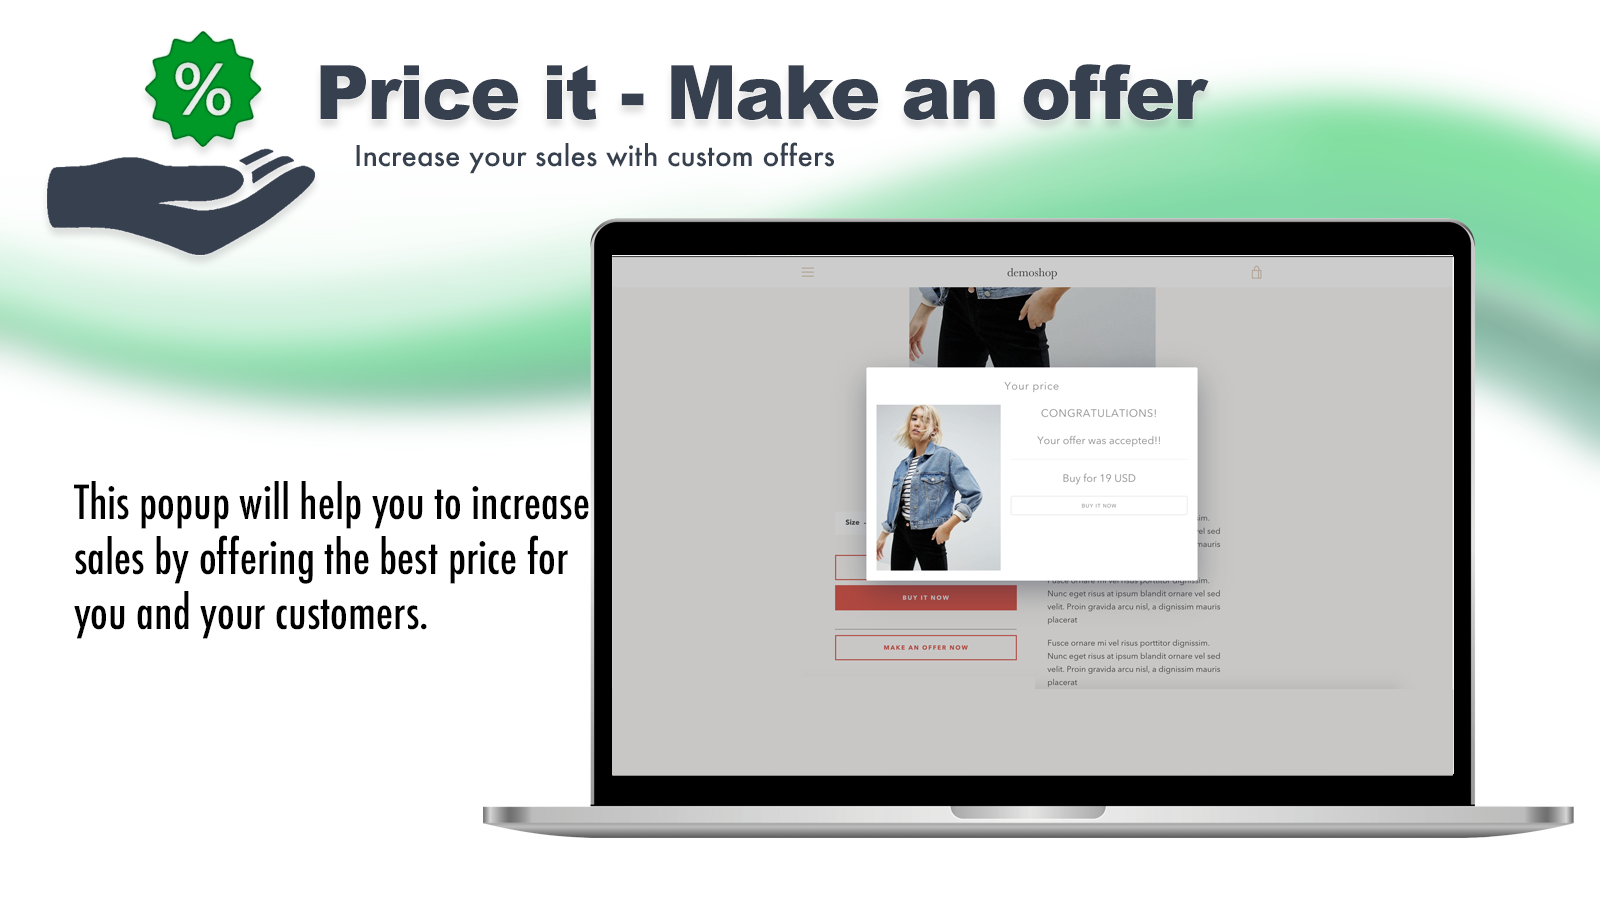 Increase sales by offering the best price